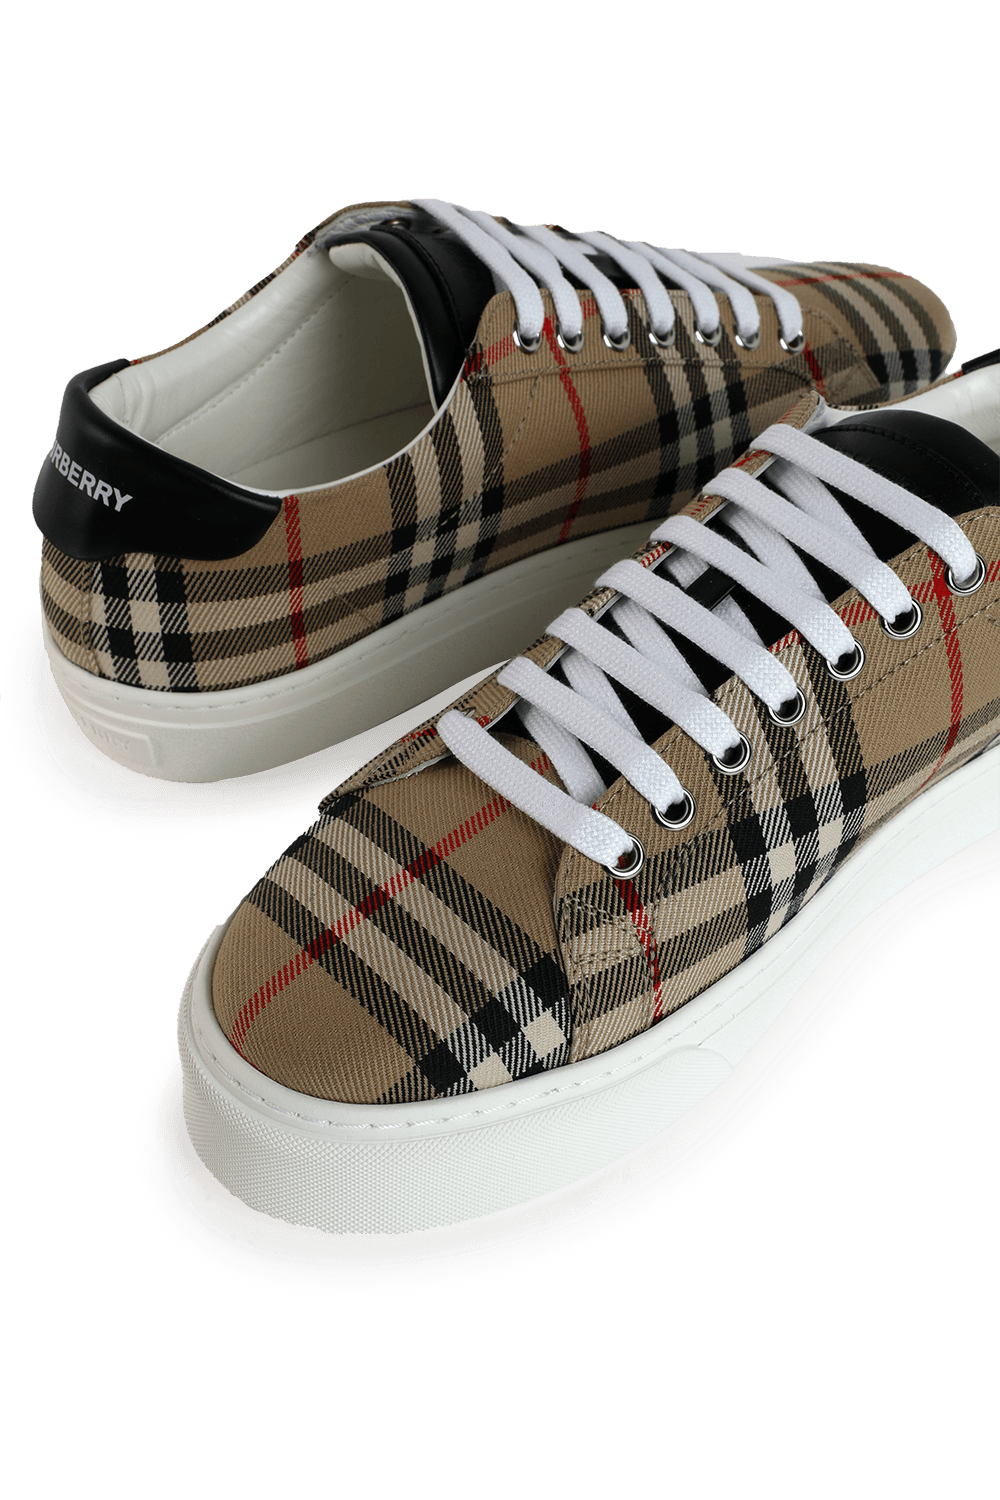 Vintage Check and Leather Sneakers BURBERRY